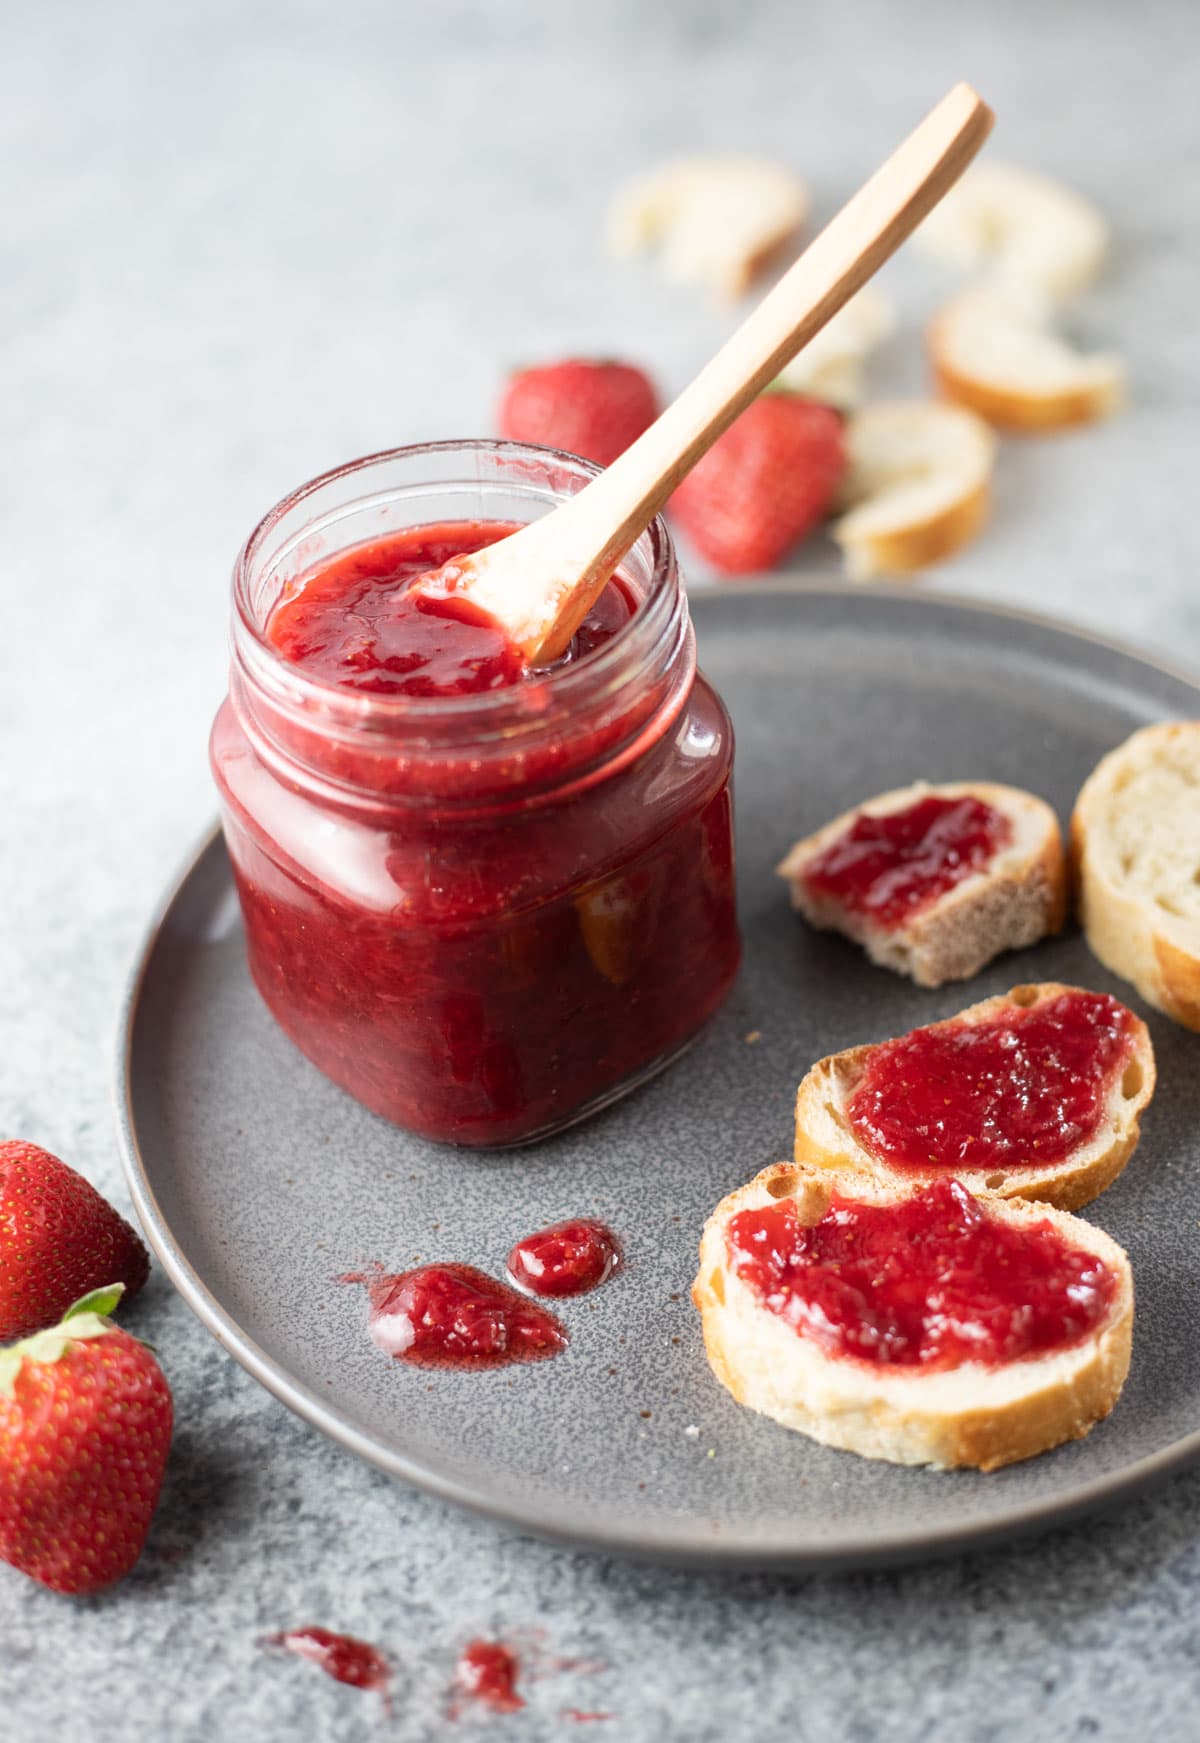 Strawberry Jam in a glass jar on a plate, along with jam spread on sliced bread